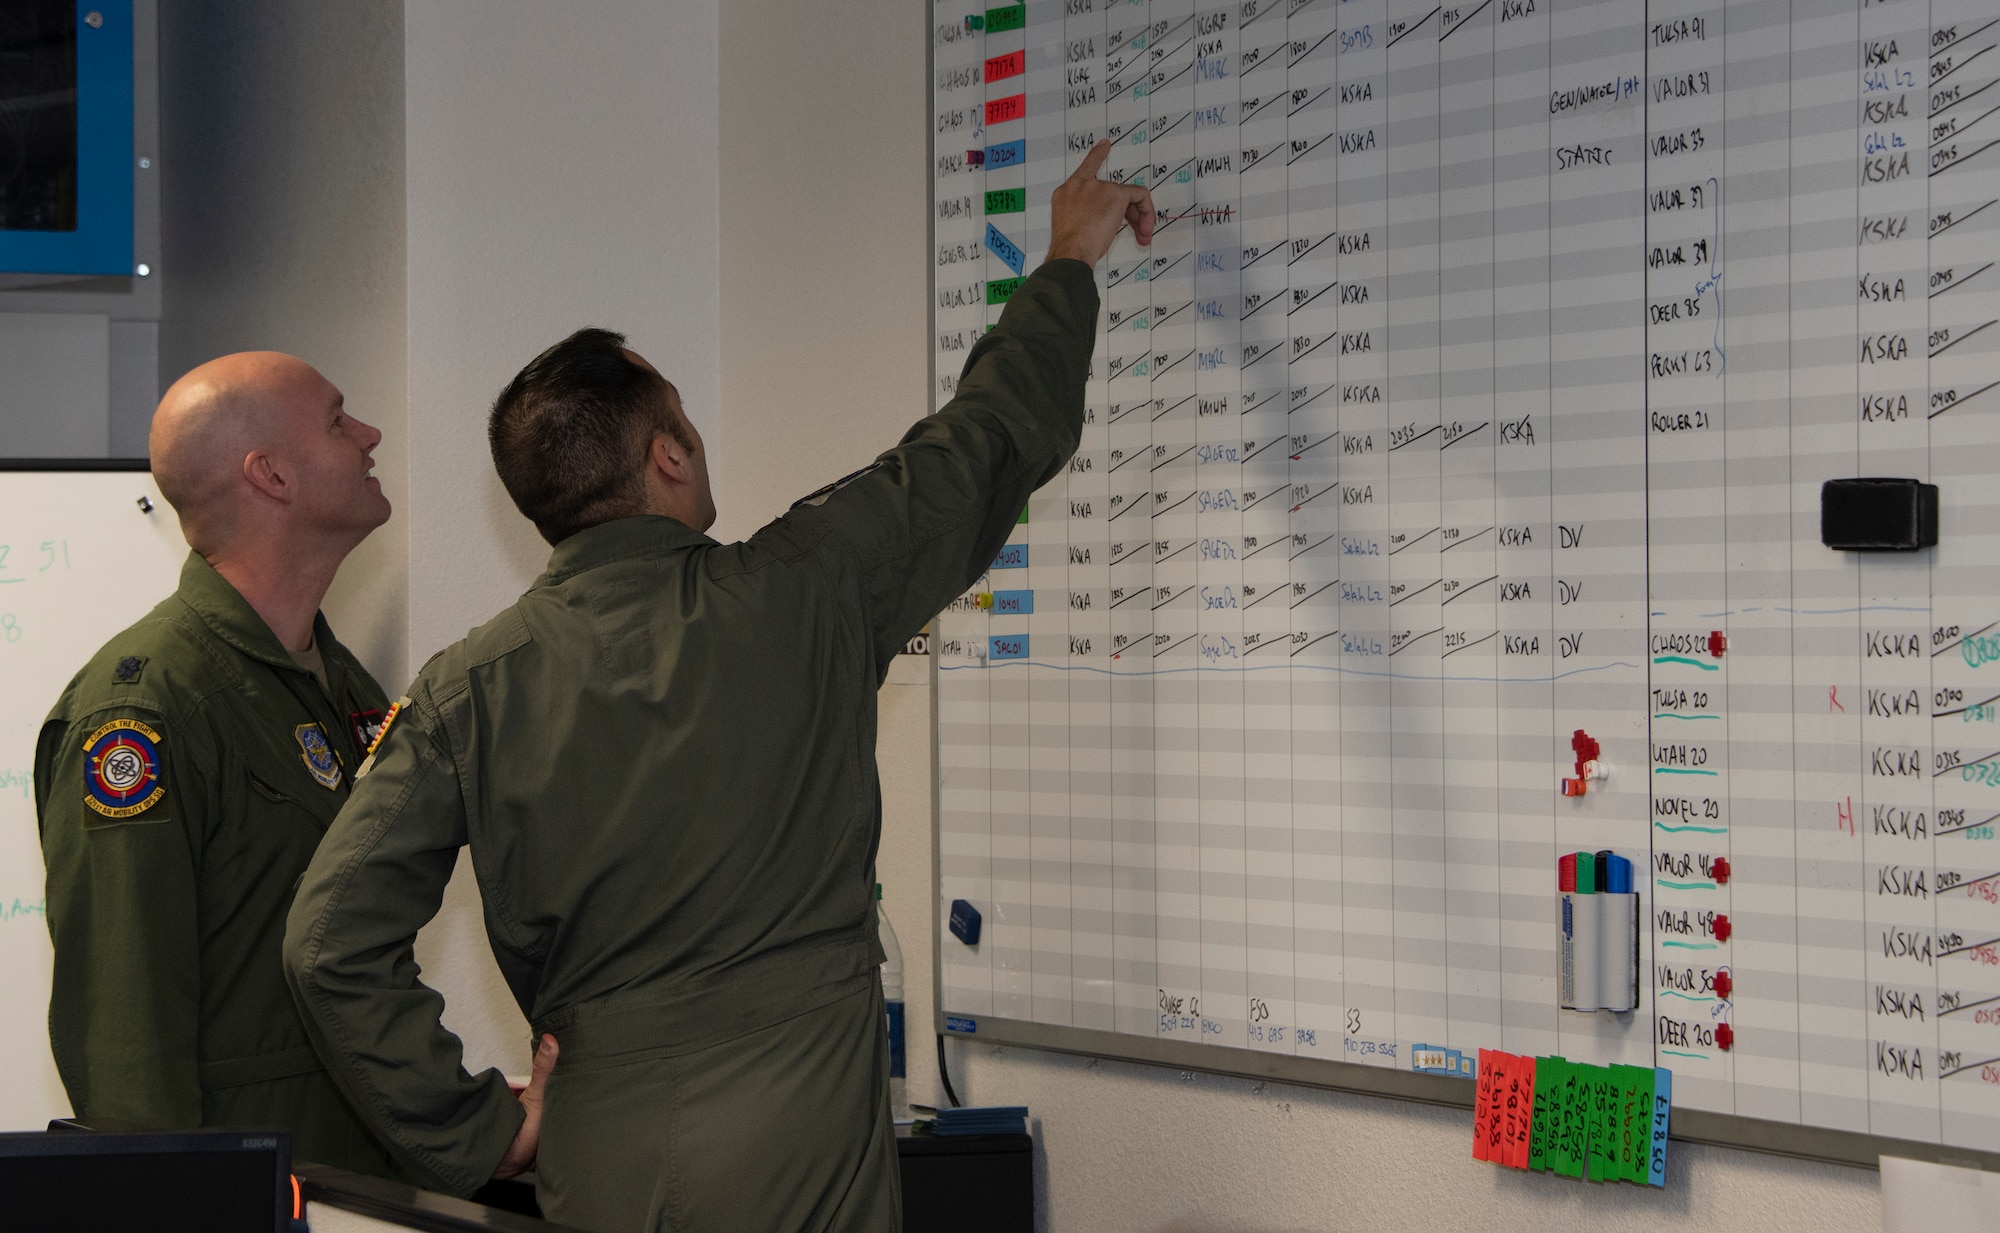 U.S. Air Force Lt. Col. John Berger, left, commander, and Maj. James Chongris, executive officer, 321st Air Mobility Operations Squadron, view current statistics at the Weapons Systems Suite in the Air Operations Center during exercise Mobility Guardian Sept. 25, 2019, at Travis Air Force Base, California. MG19 is Air Mobility Command’s flagship exercise for large-scale, rapid global mobility operations. Forty-six U.S. aircraft joined aircraft from 29 international partners, along with more than 4,000 U.S. and international Air Force, Army, Navy and Marine Corps aviators. (U.S. Air Force photo by Heide Couch)